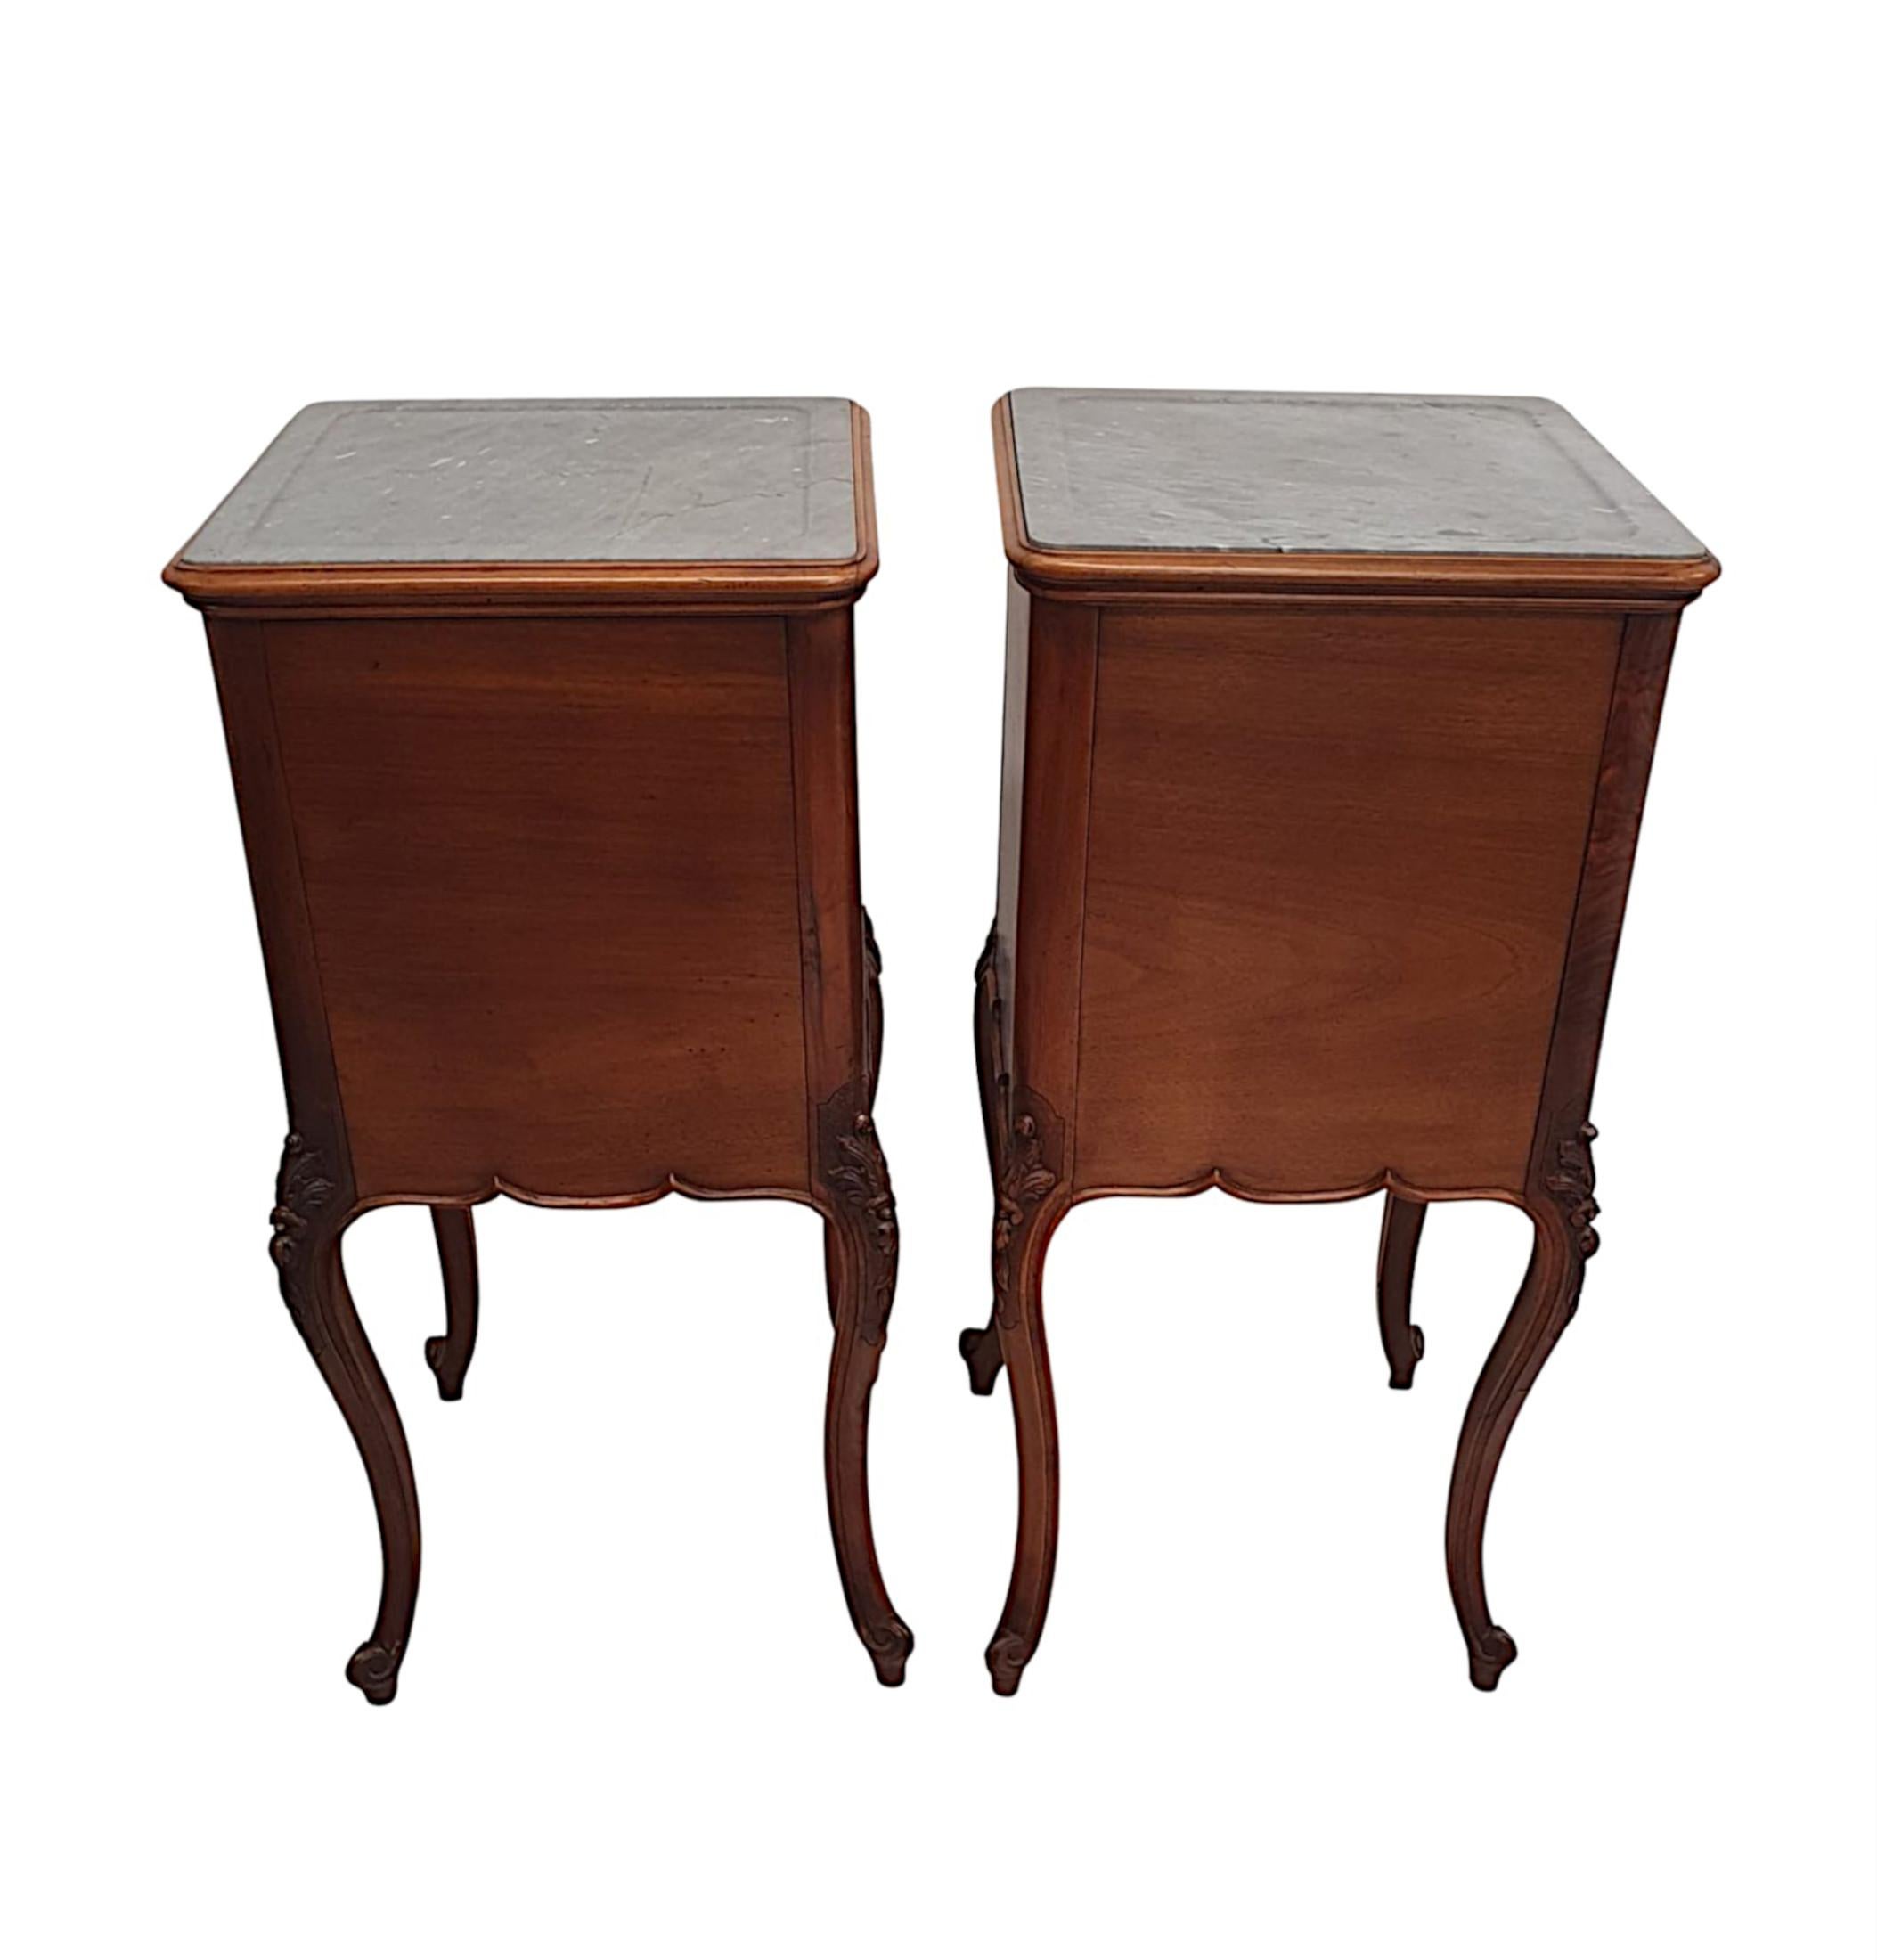 A Fabulous Pair of 19th Century Marble Top Bedside Tables  For Sale 1